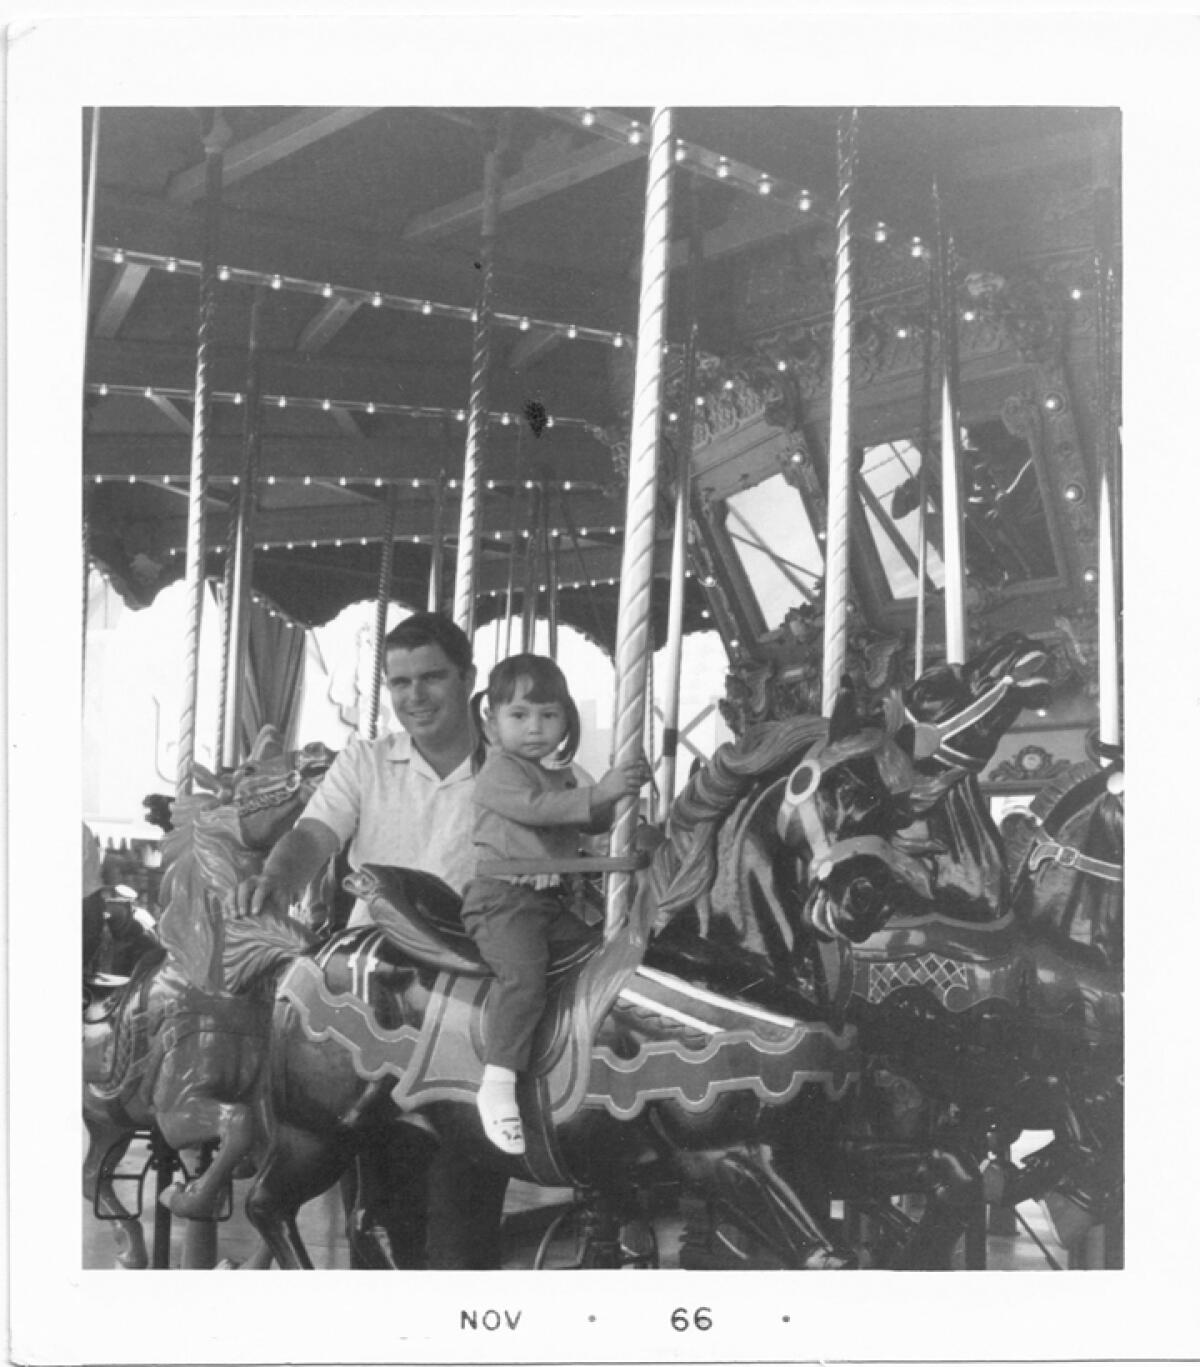 A black and white photograph of a father and daughter on a merry-go-round.